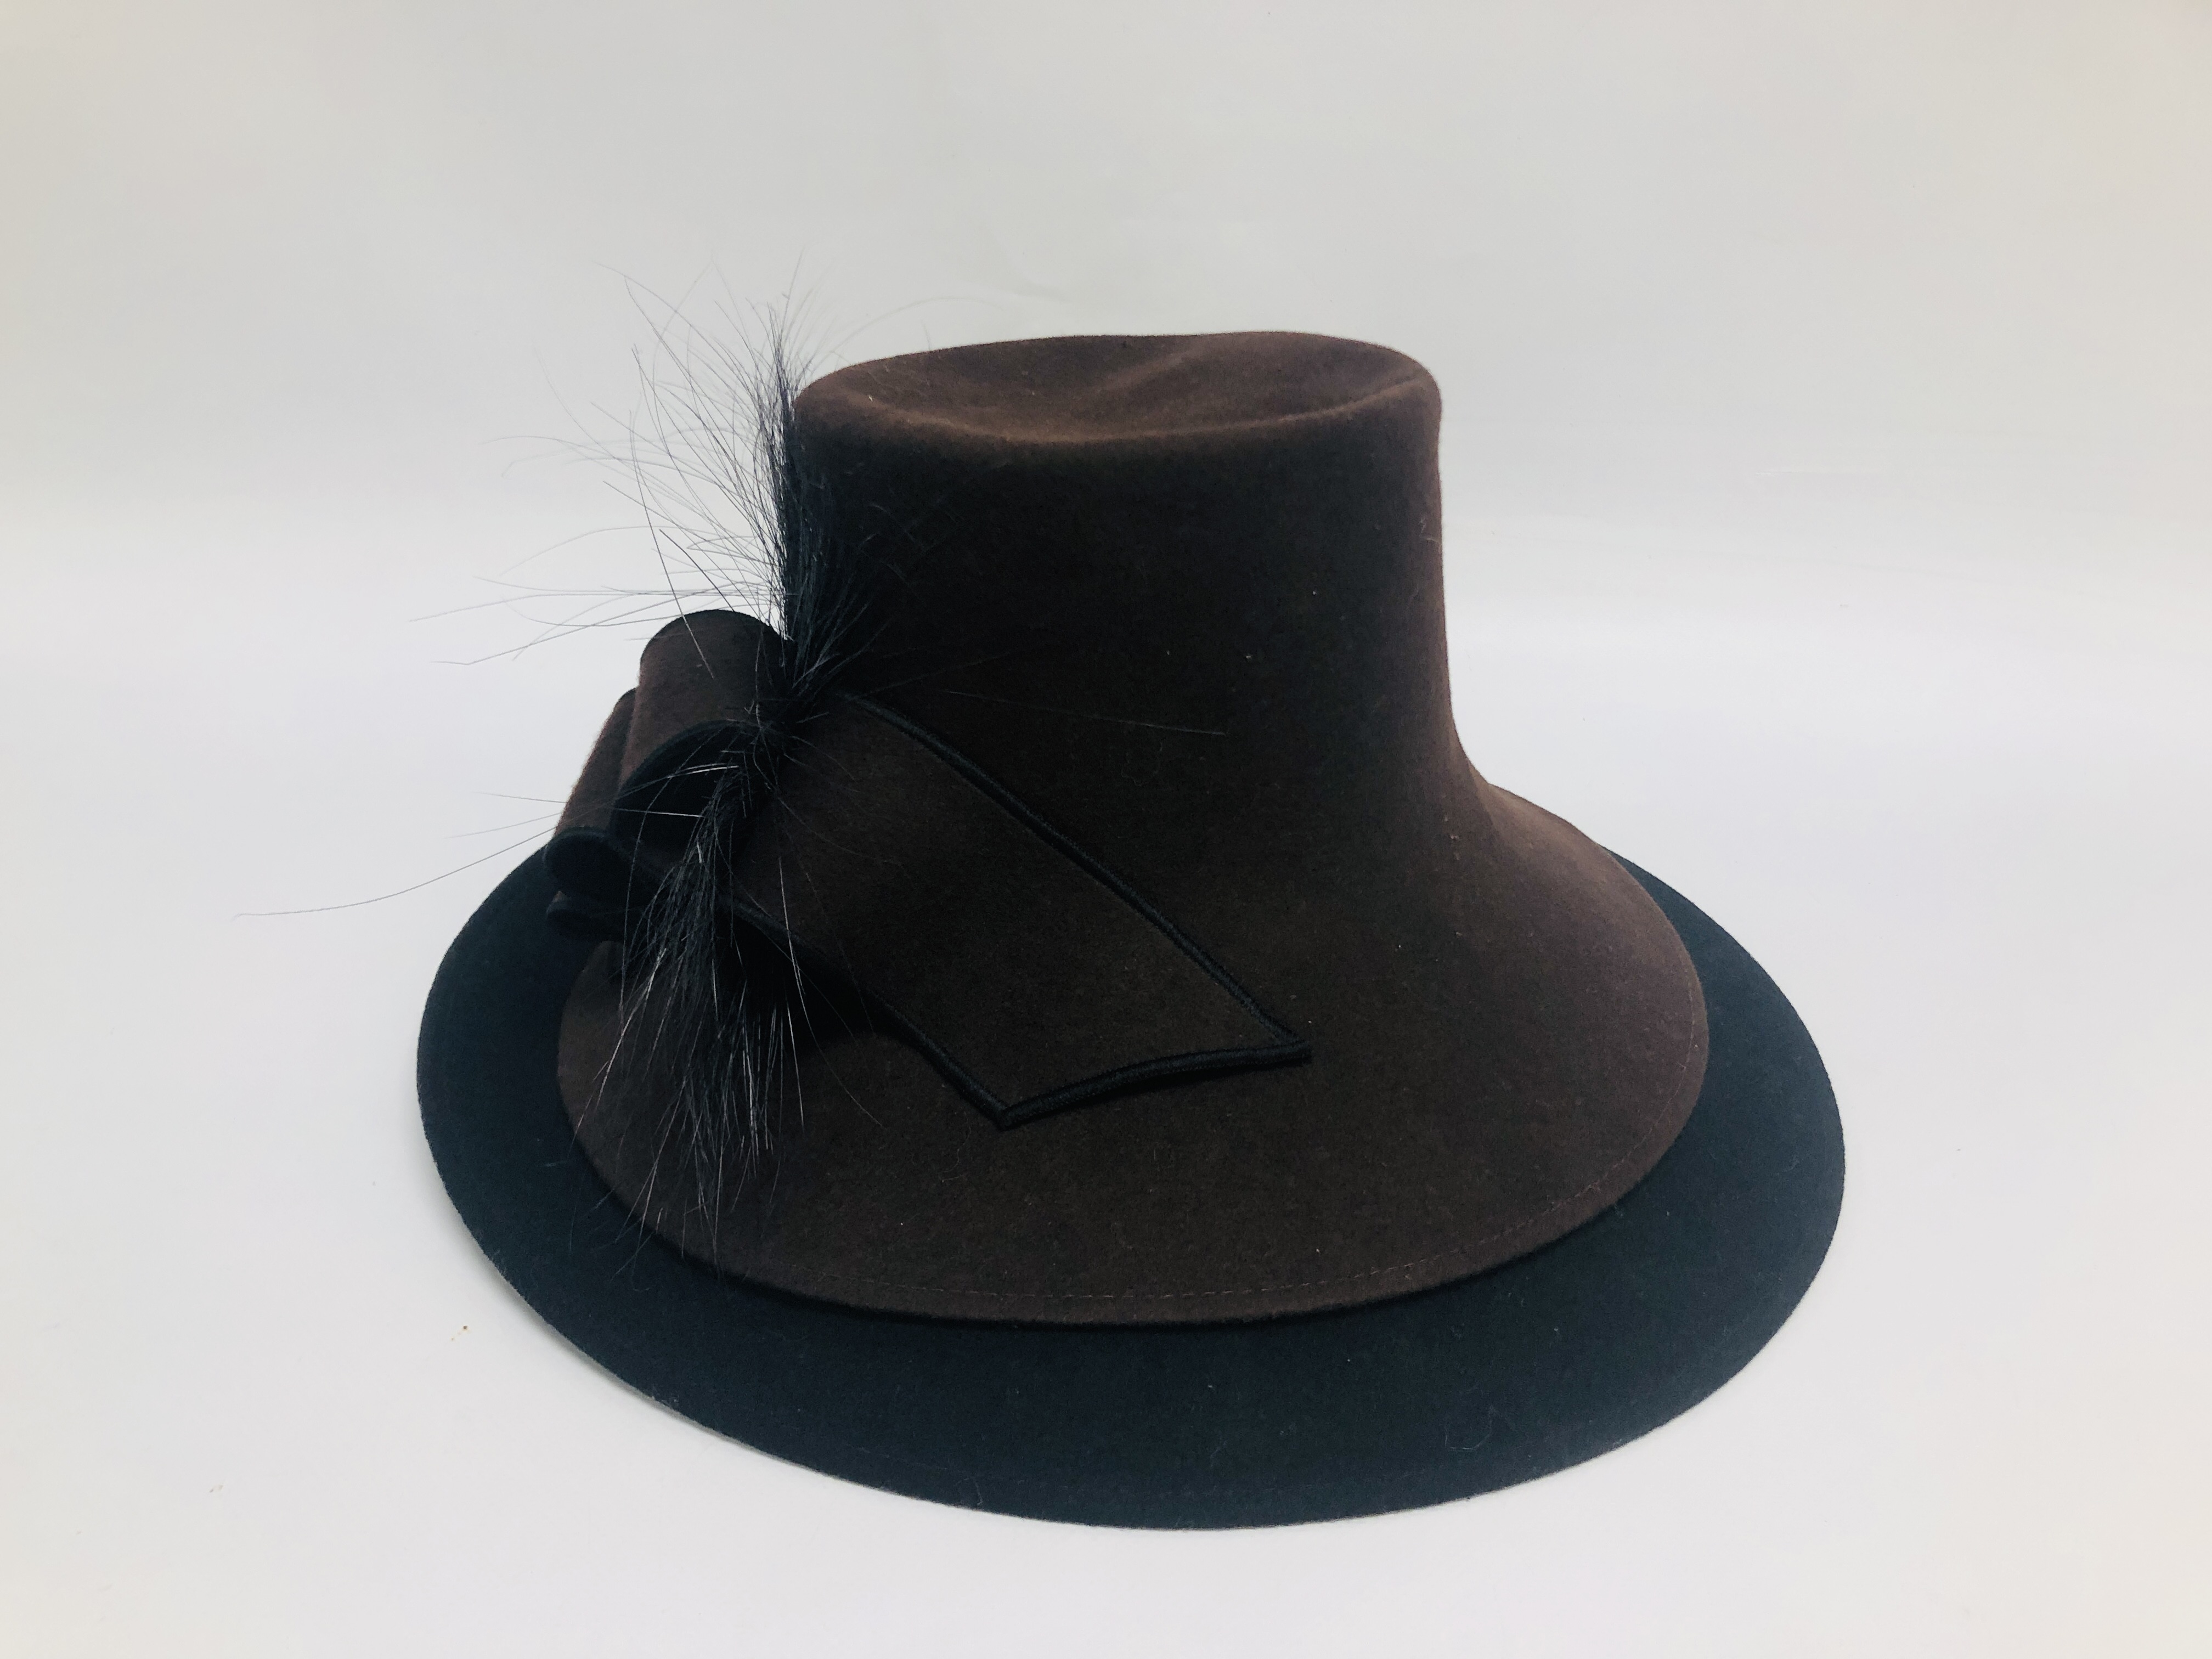 TWO DESIGNER BRANDED OCCASIONAL HATS TO INCLUDE HARRODS WHITELEY AND HEADWORKS BY GRAHAM GWYTHER. - Image 5 of 7